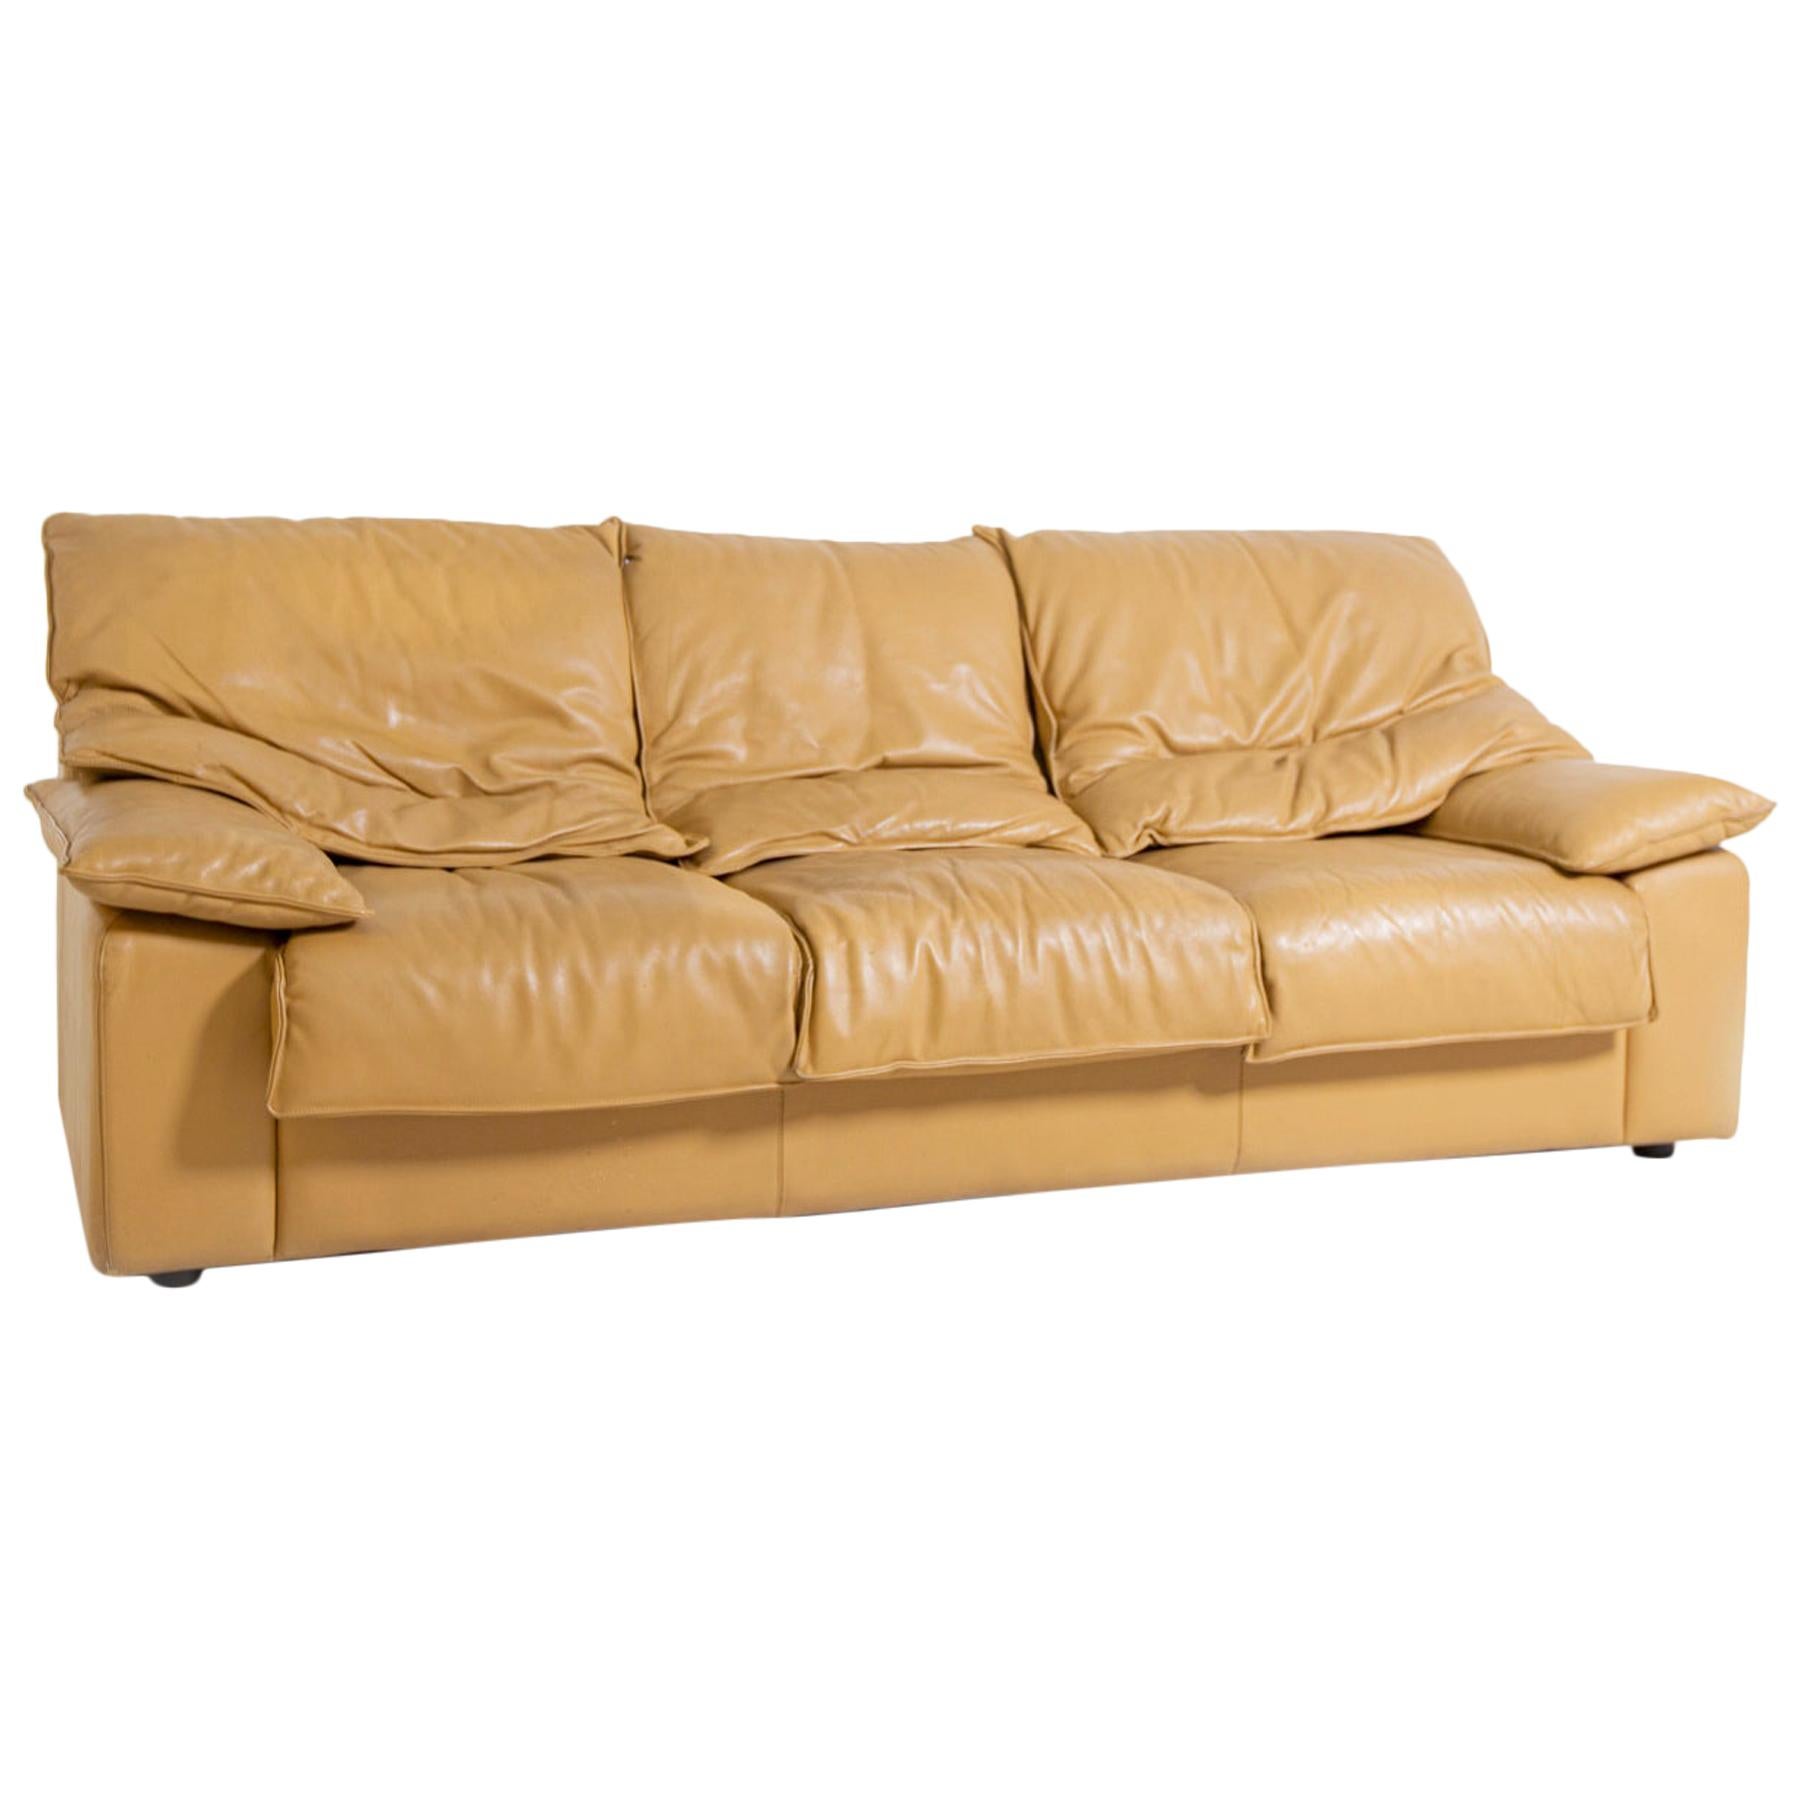 Vintage Italian Sofa Camel-Colored Leather Three-Seat, 1970s For Sale